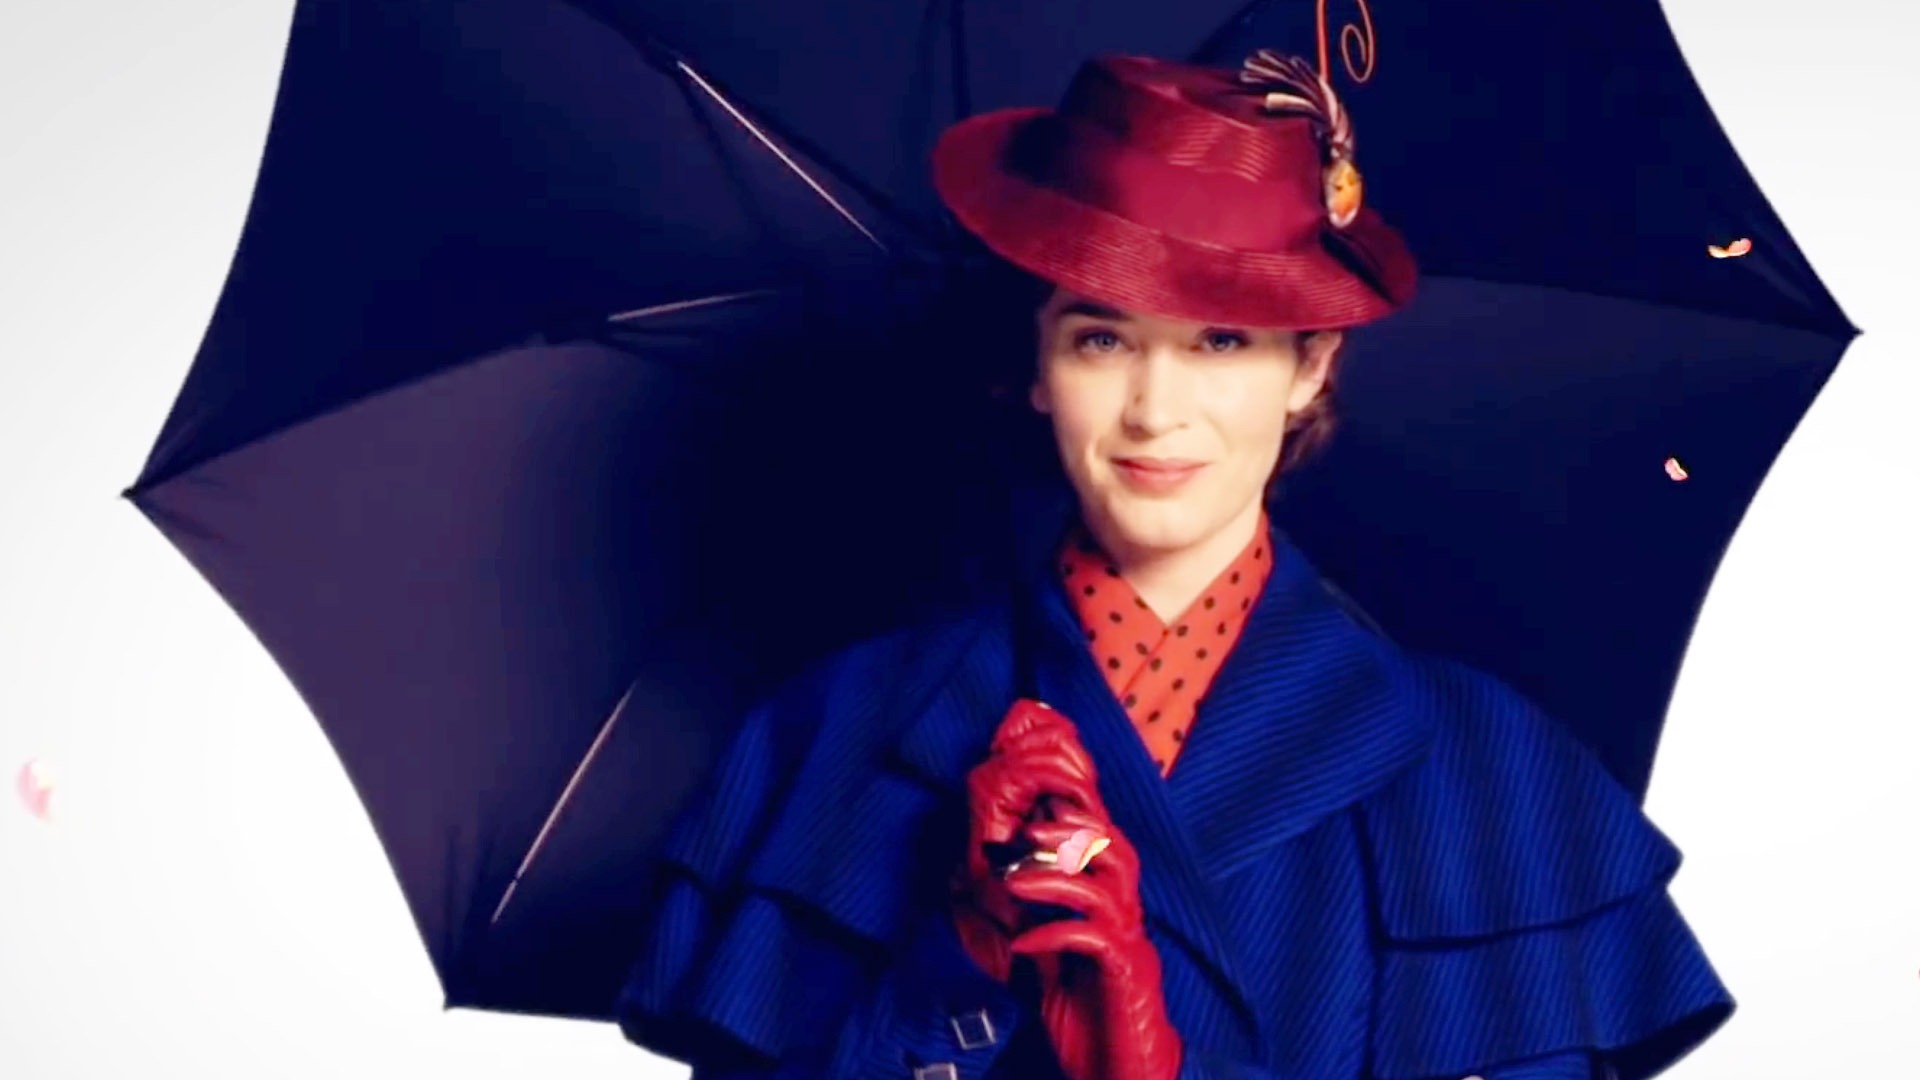 Mary Poppins Returns' for the 21st century